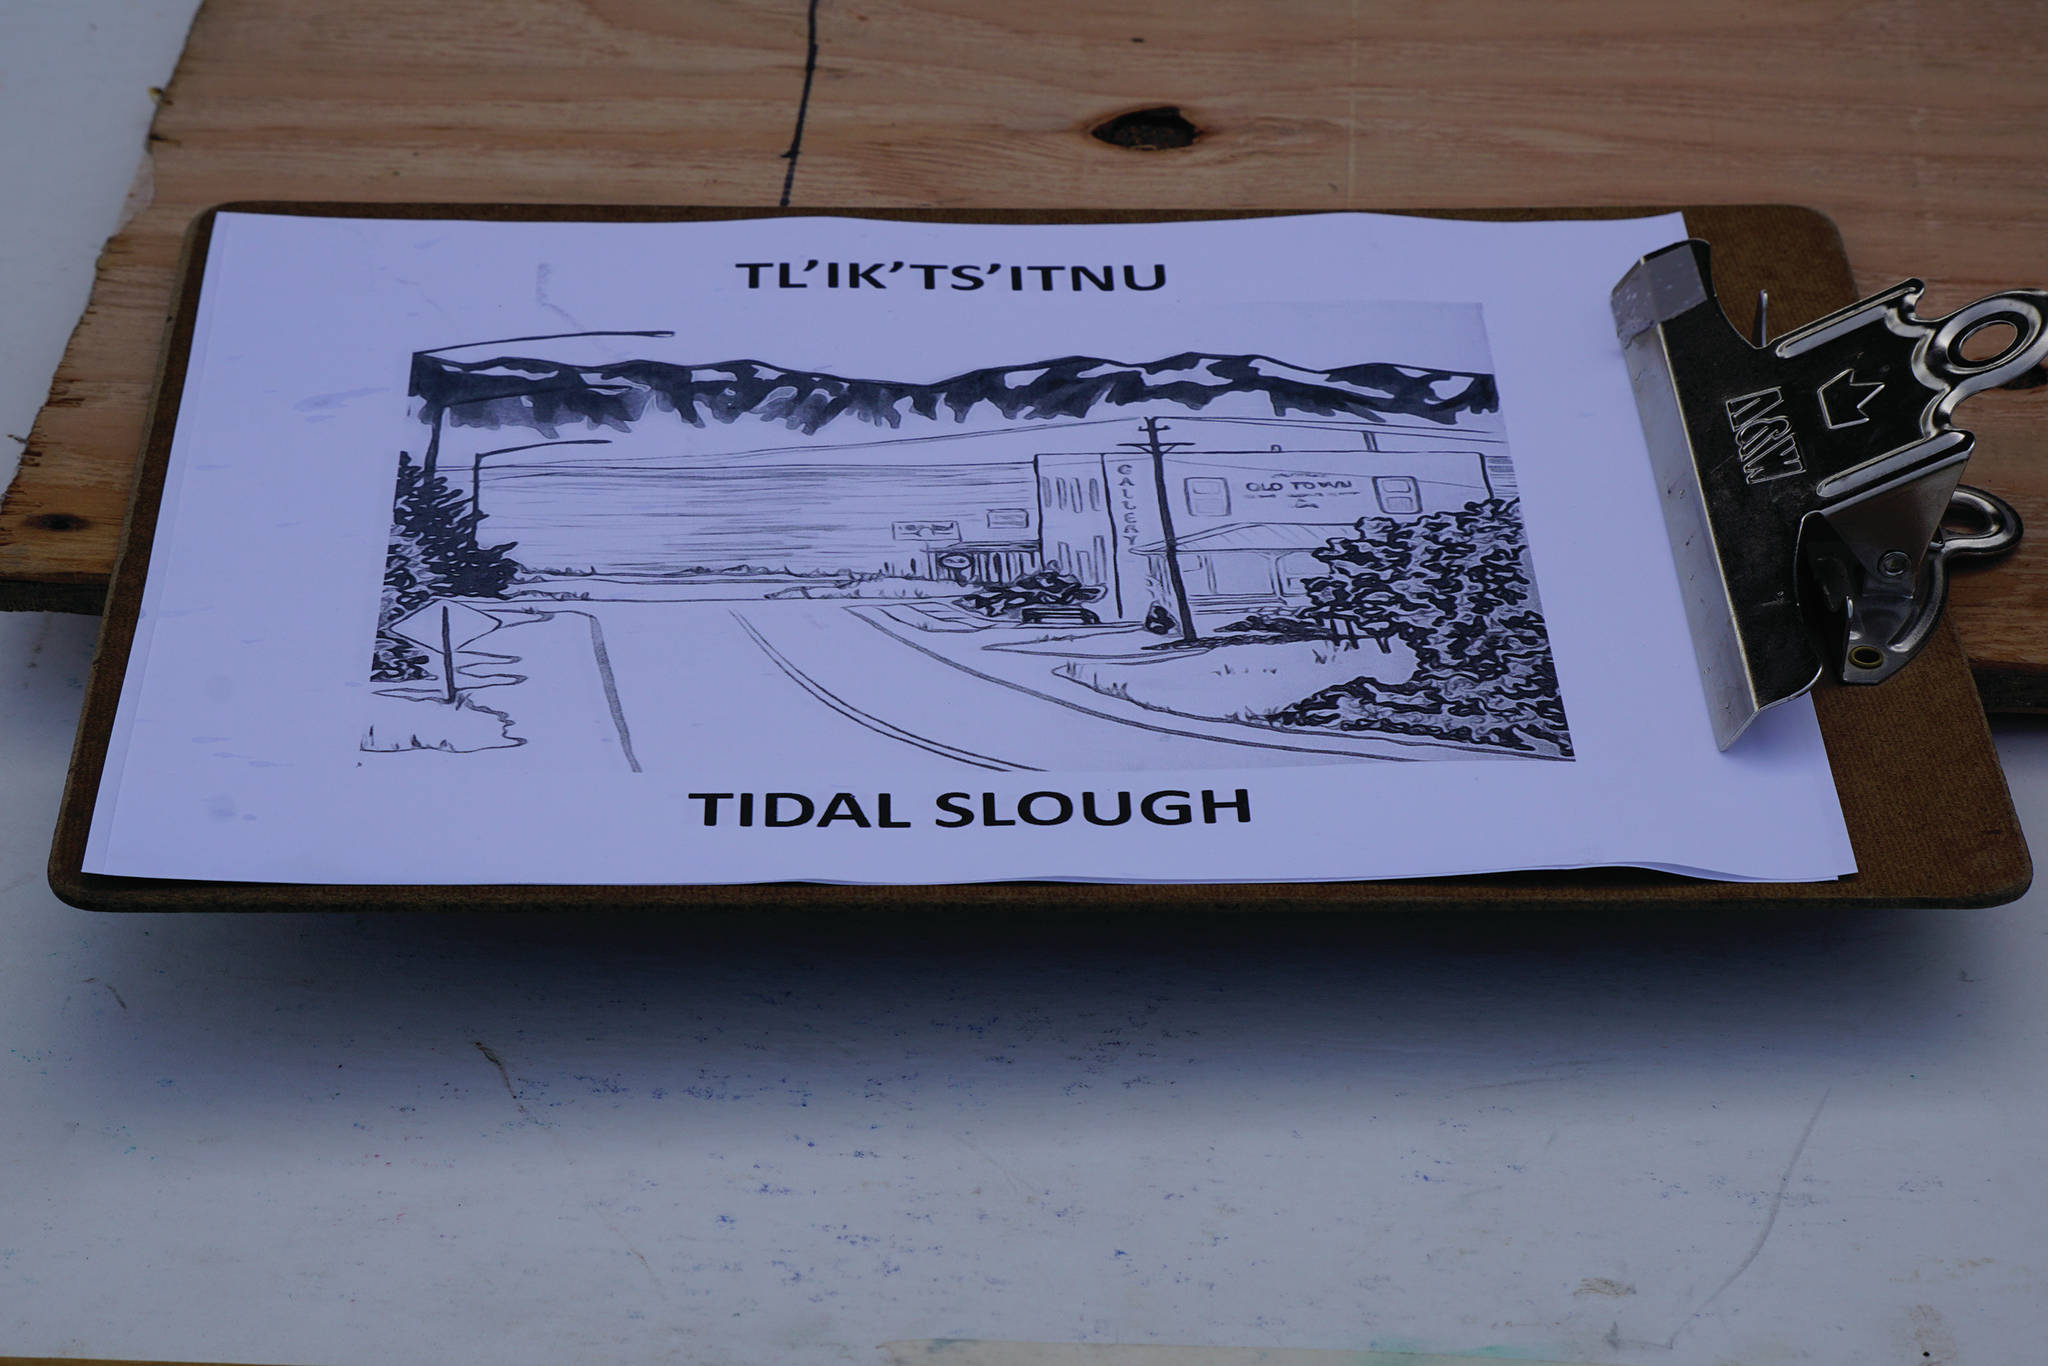 A clipboard shows the Dena’ina word for “tidal slough,” “Tl’ik’ts’itnu” with an illustration of the Old Town area of Homer. It was part of the material used in “Land Acknowledgement in Action: Sign Installation” last Saturday, Aug. 22, 2020, at the Bishop’s Beach pavillion — the area known by the Dena’ina people as “Tuggeht,” or “at the water.” (Photo by Michael Armstrong/Homer News.)